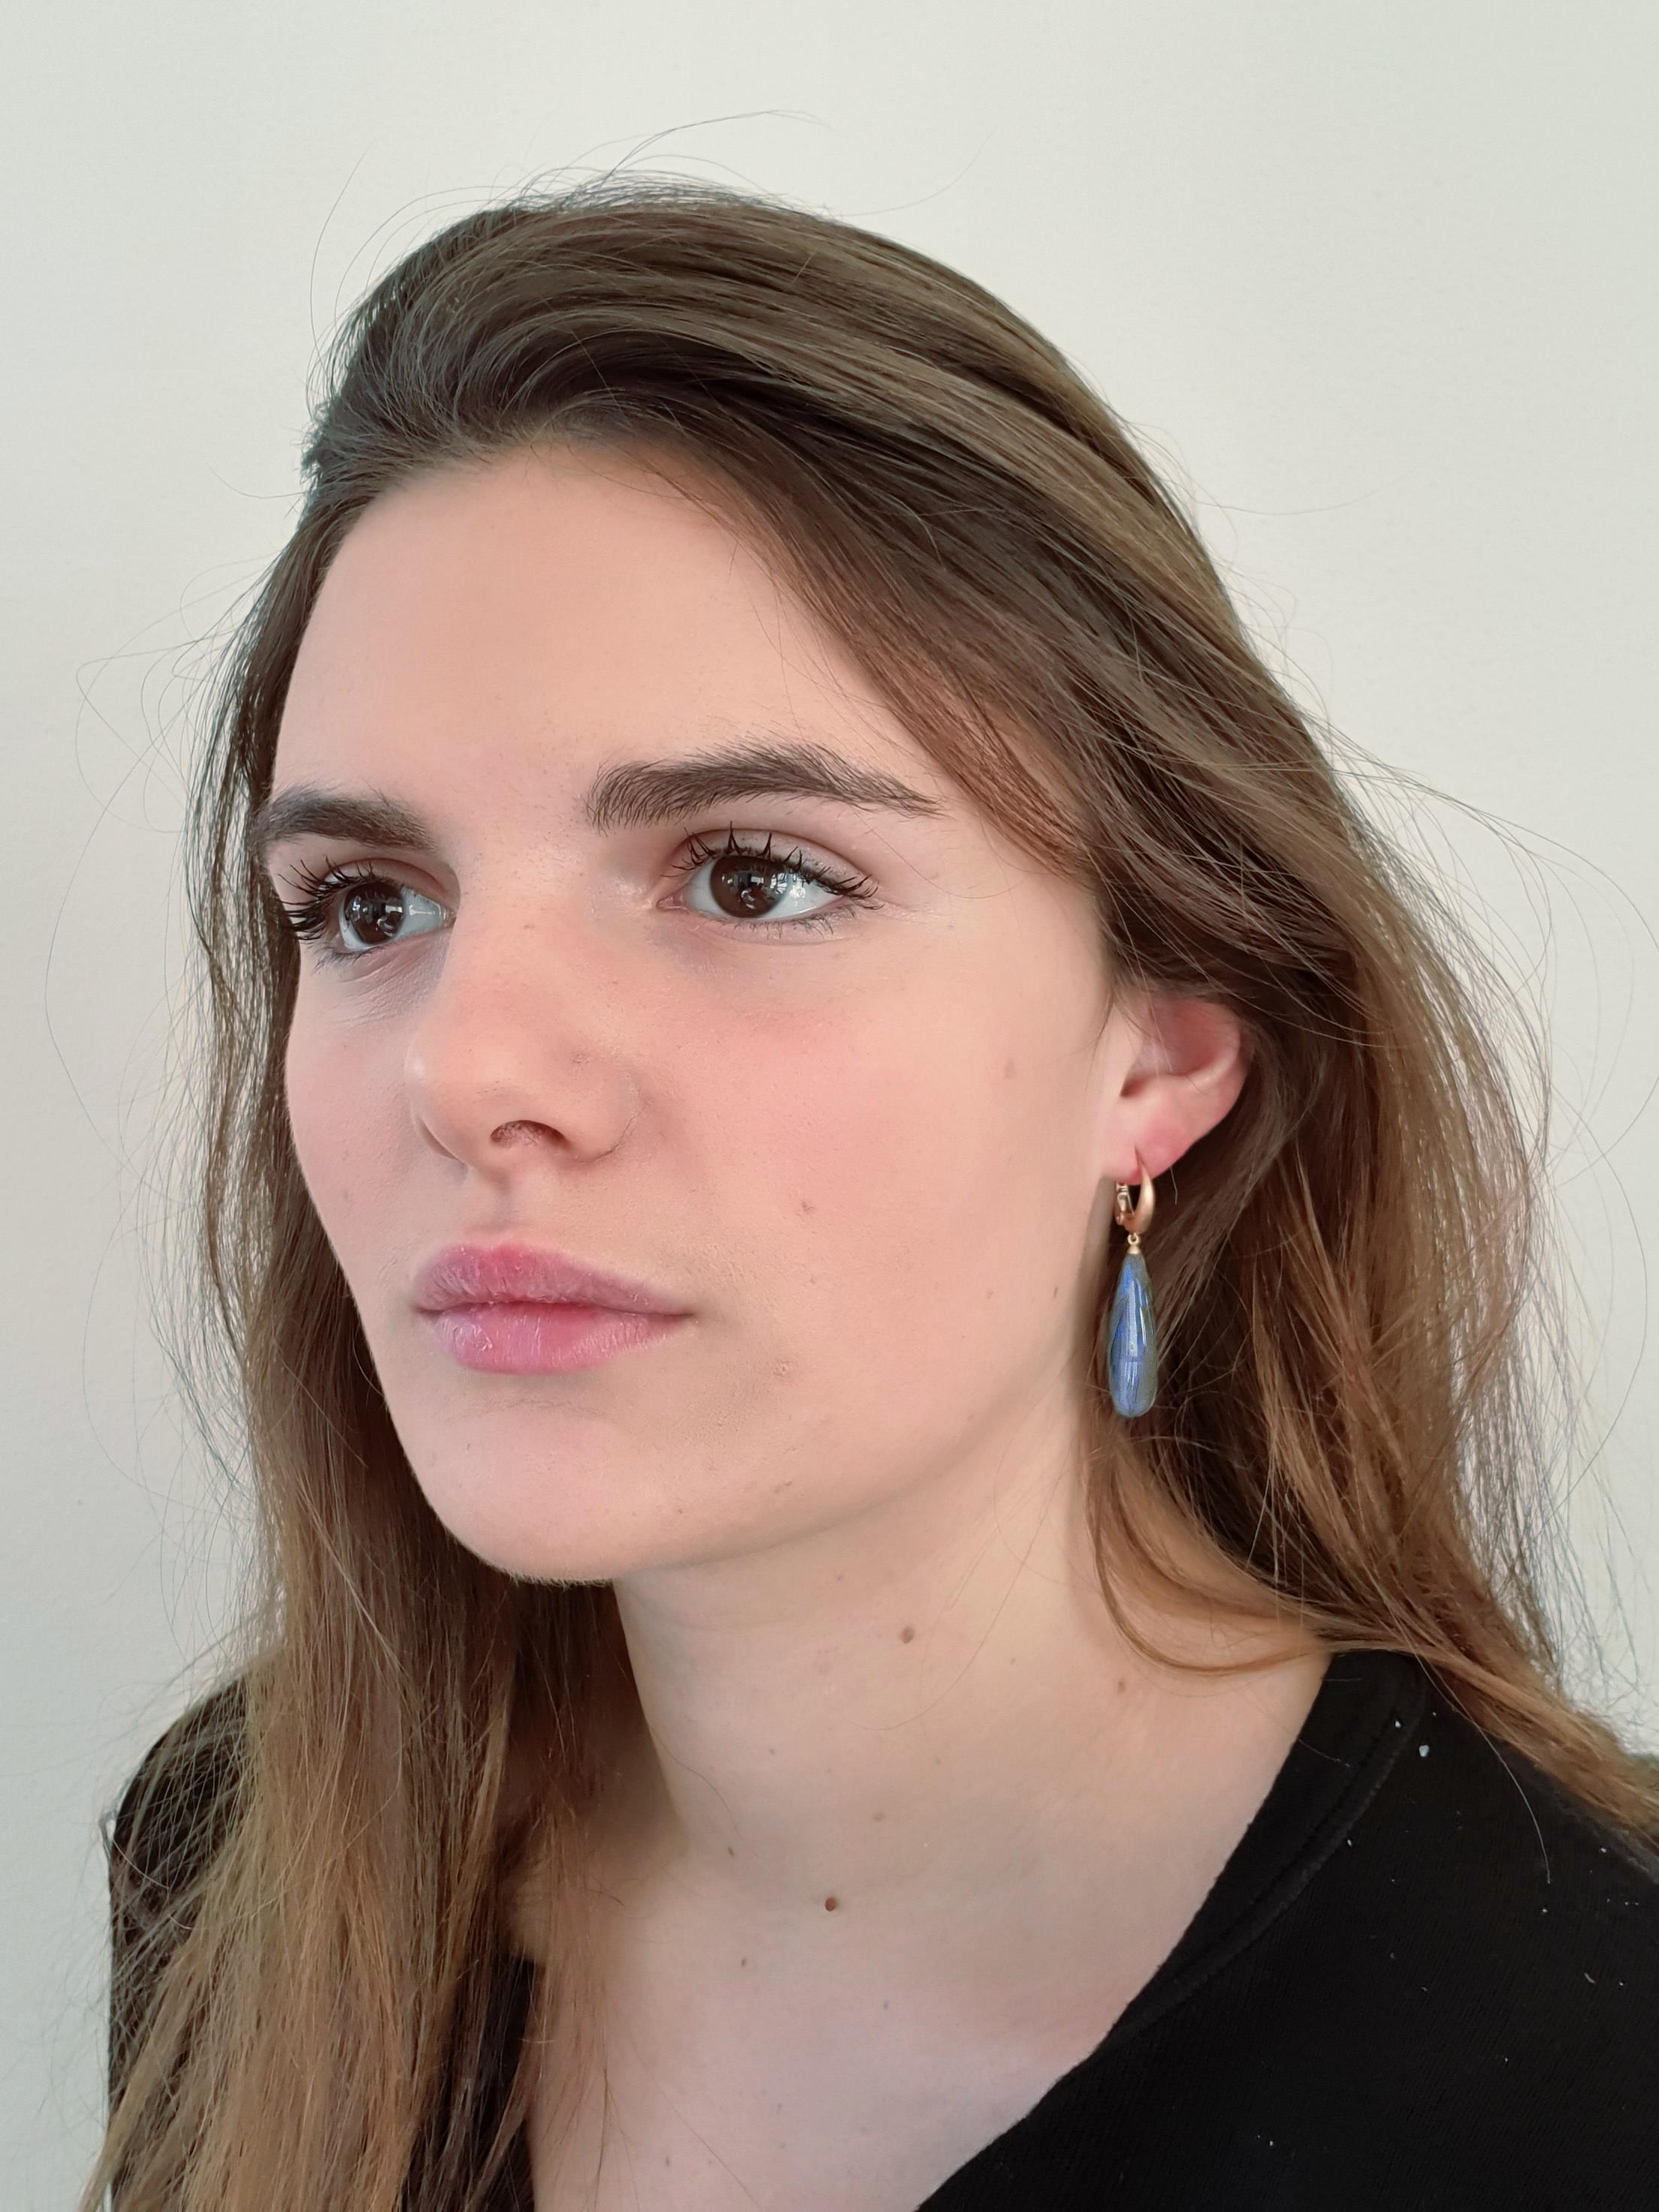 Dalben design 18 kt satin finished rose gold earrings with two drop shape grey-brown with blue flash Labradorite 10 x 30 mm . 
Earring dimension : 
width 9,7 mm 
height with leverback 46 mm 
The earrings has been designed and handcrafted in our